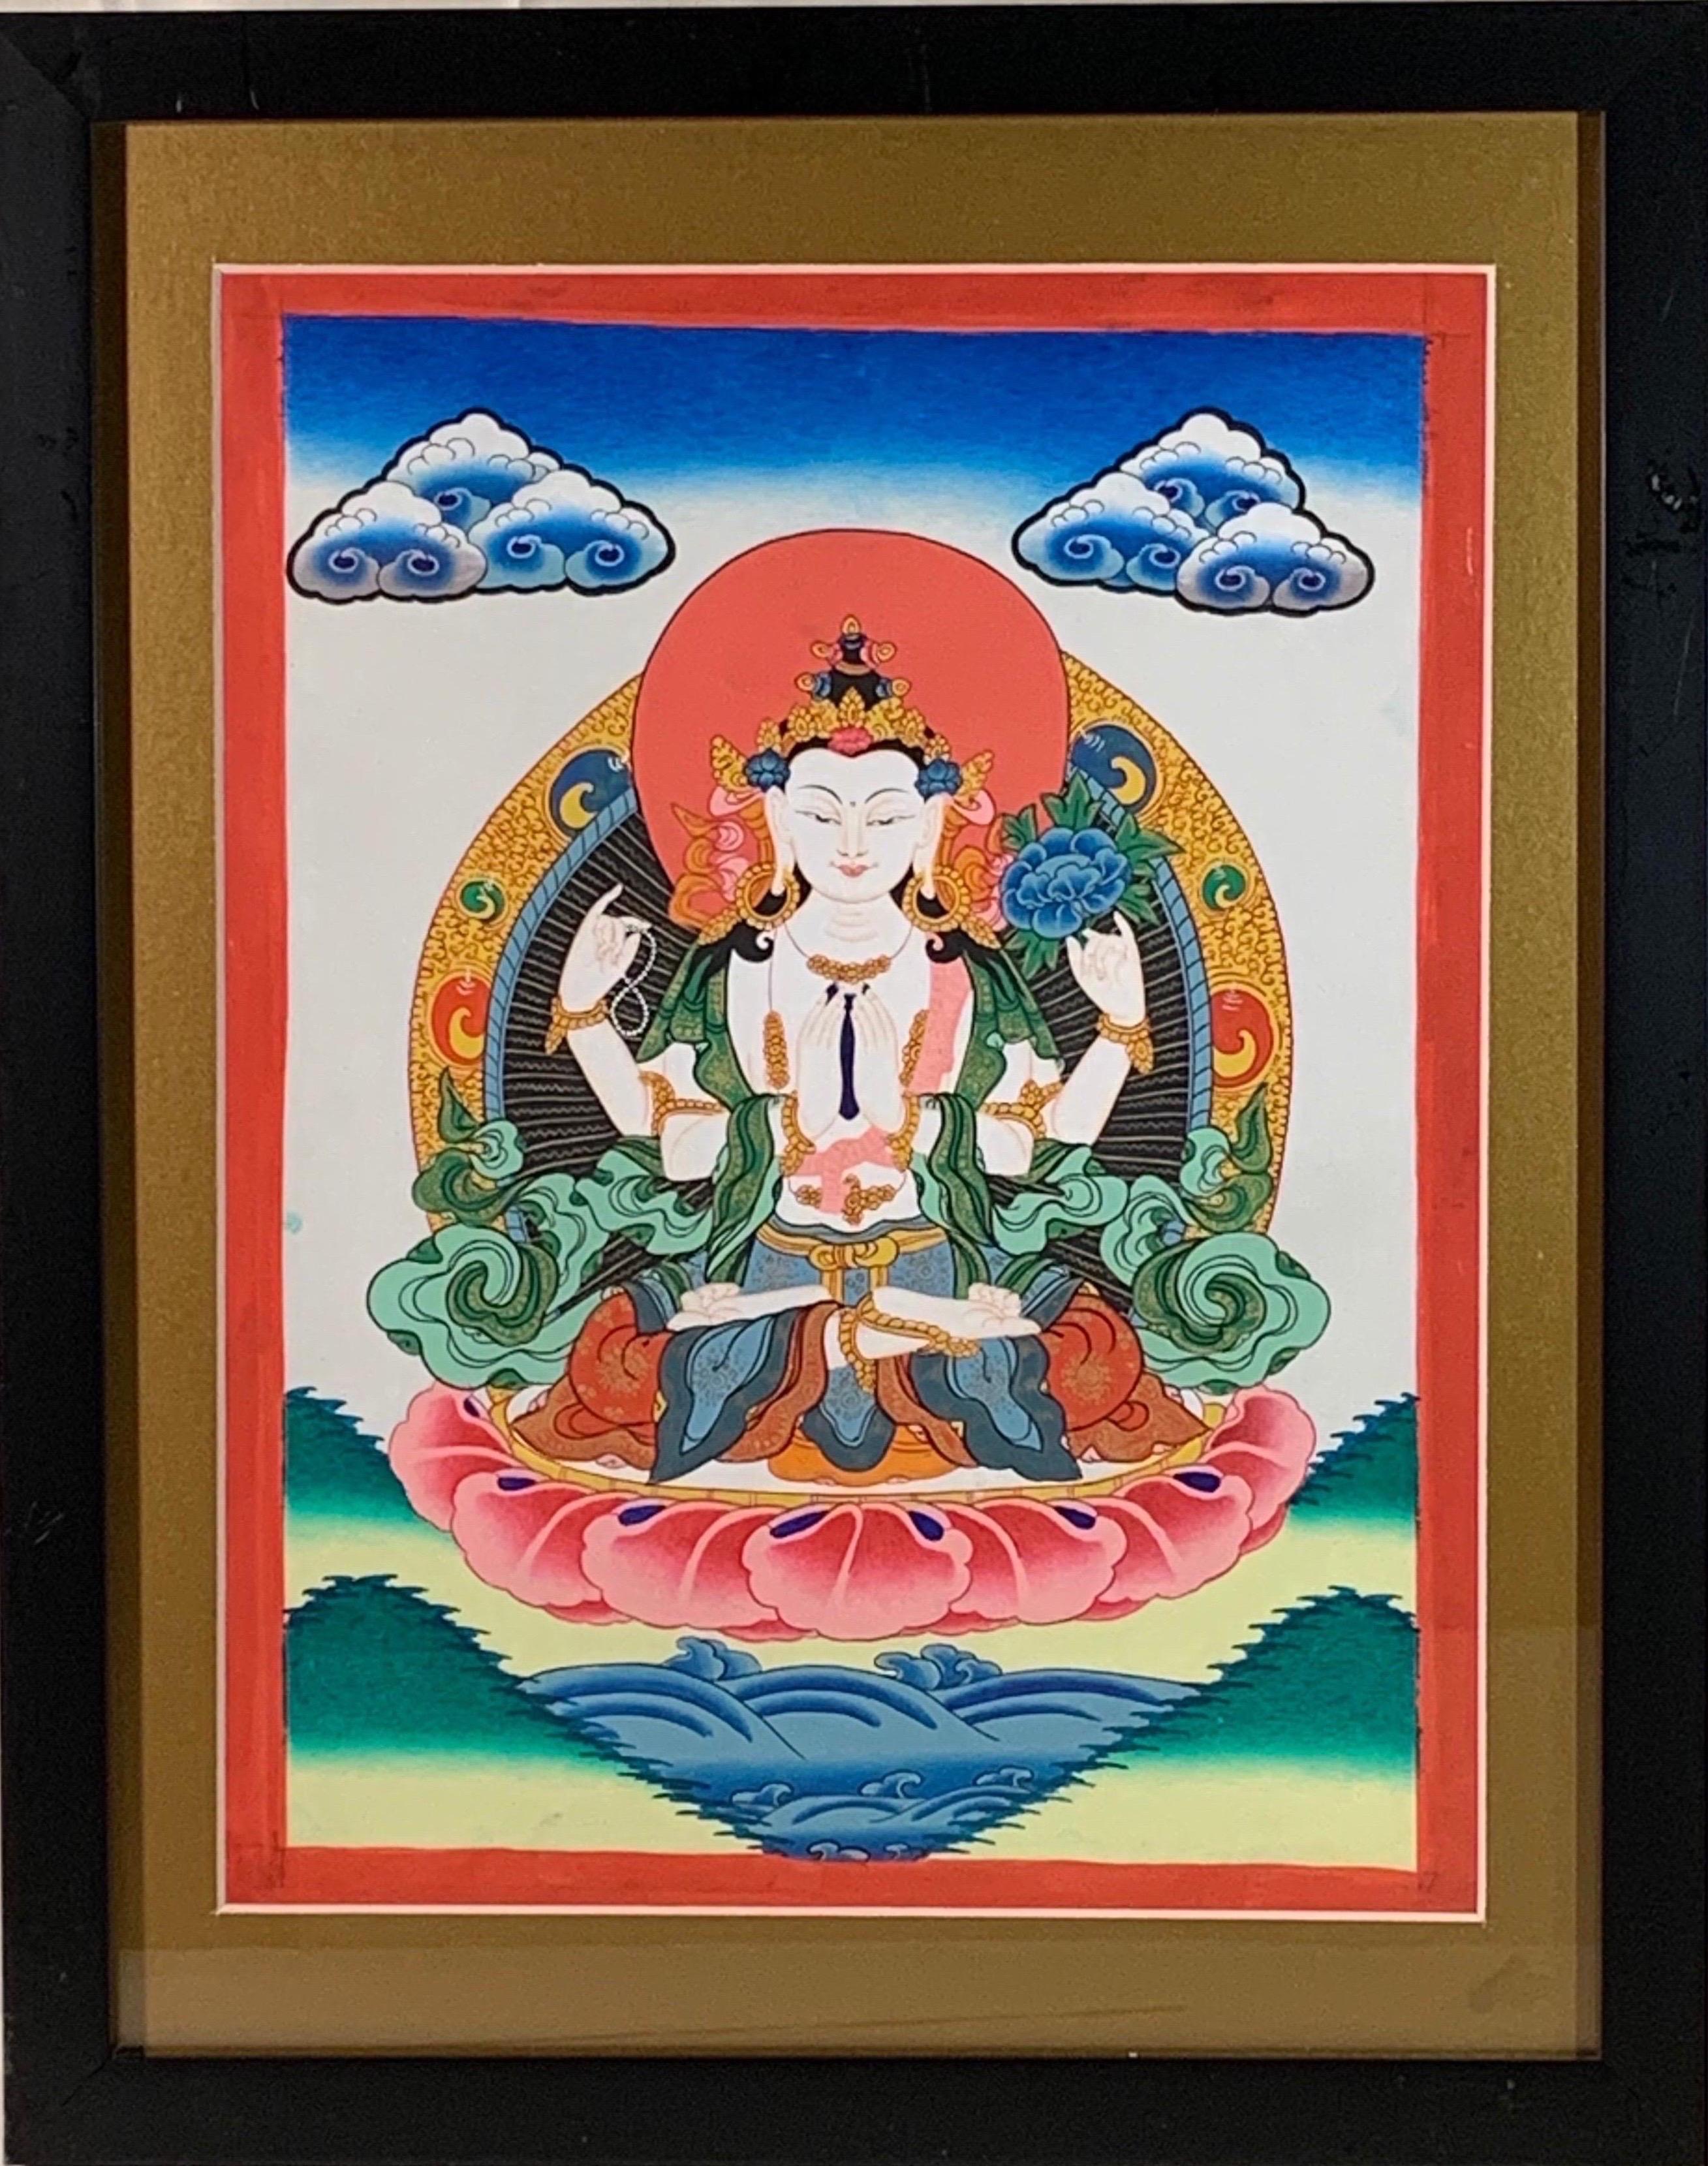 Framed Hand Painted Chenrezig Thangka on Canvas with 24K Real Gold - Mixed Media Art by Unknown